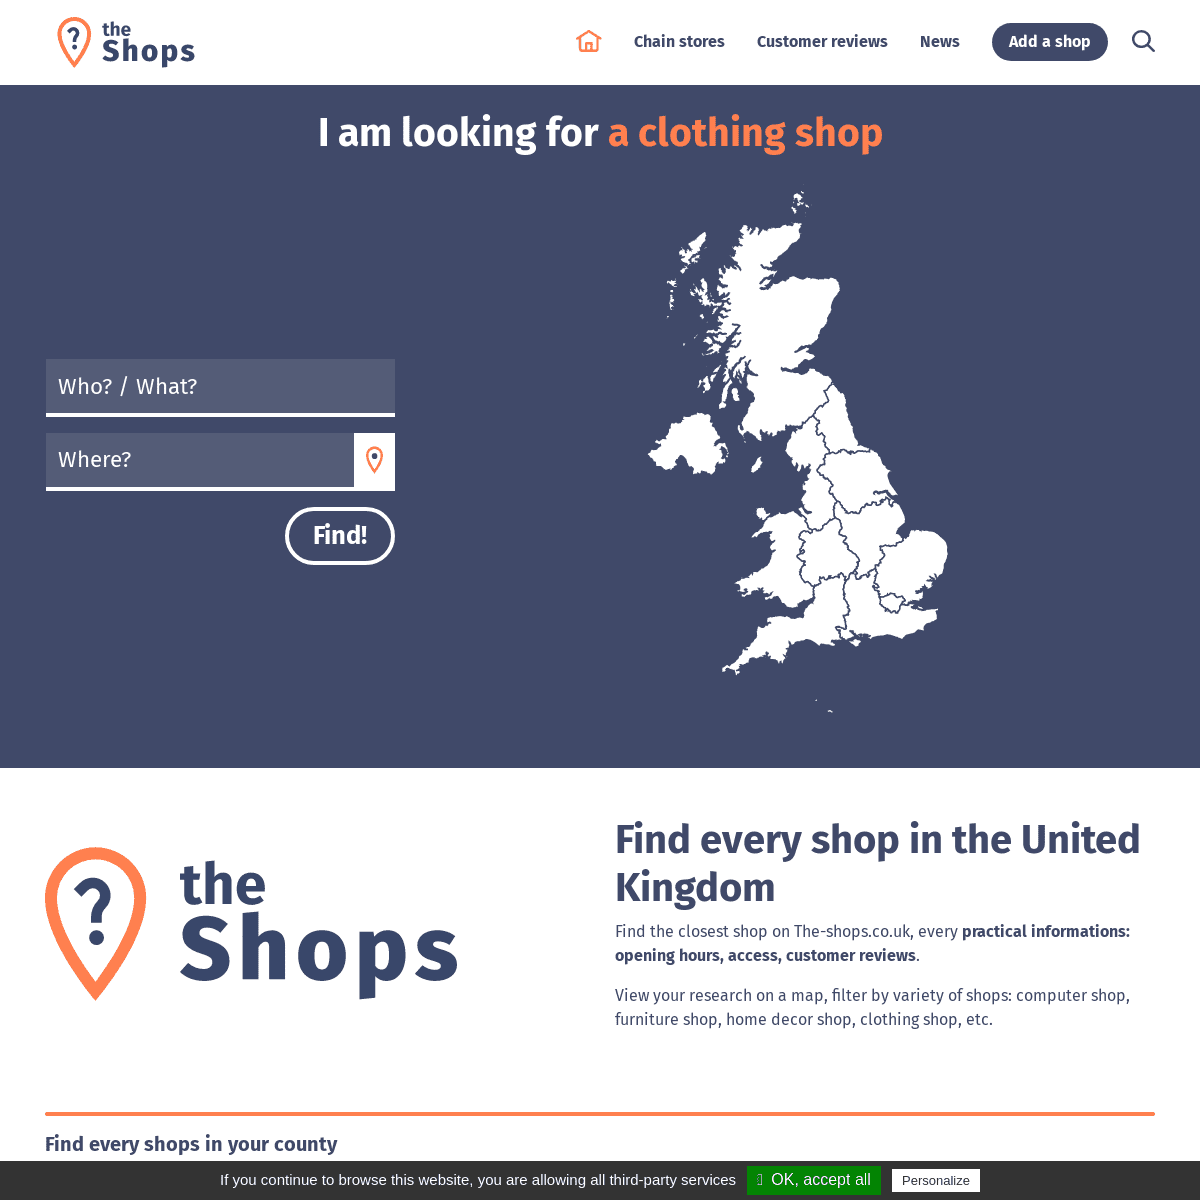 The-shops.co.uk: 85839 stores, 12882 customers’ reviews